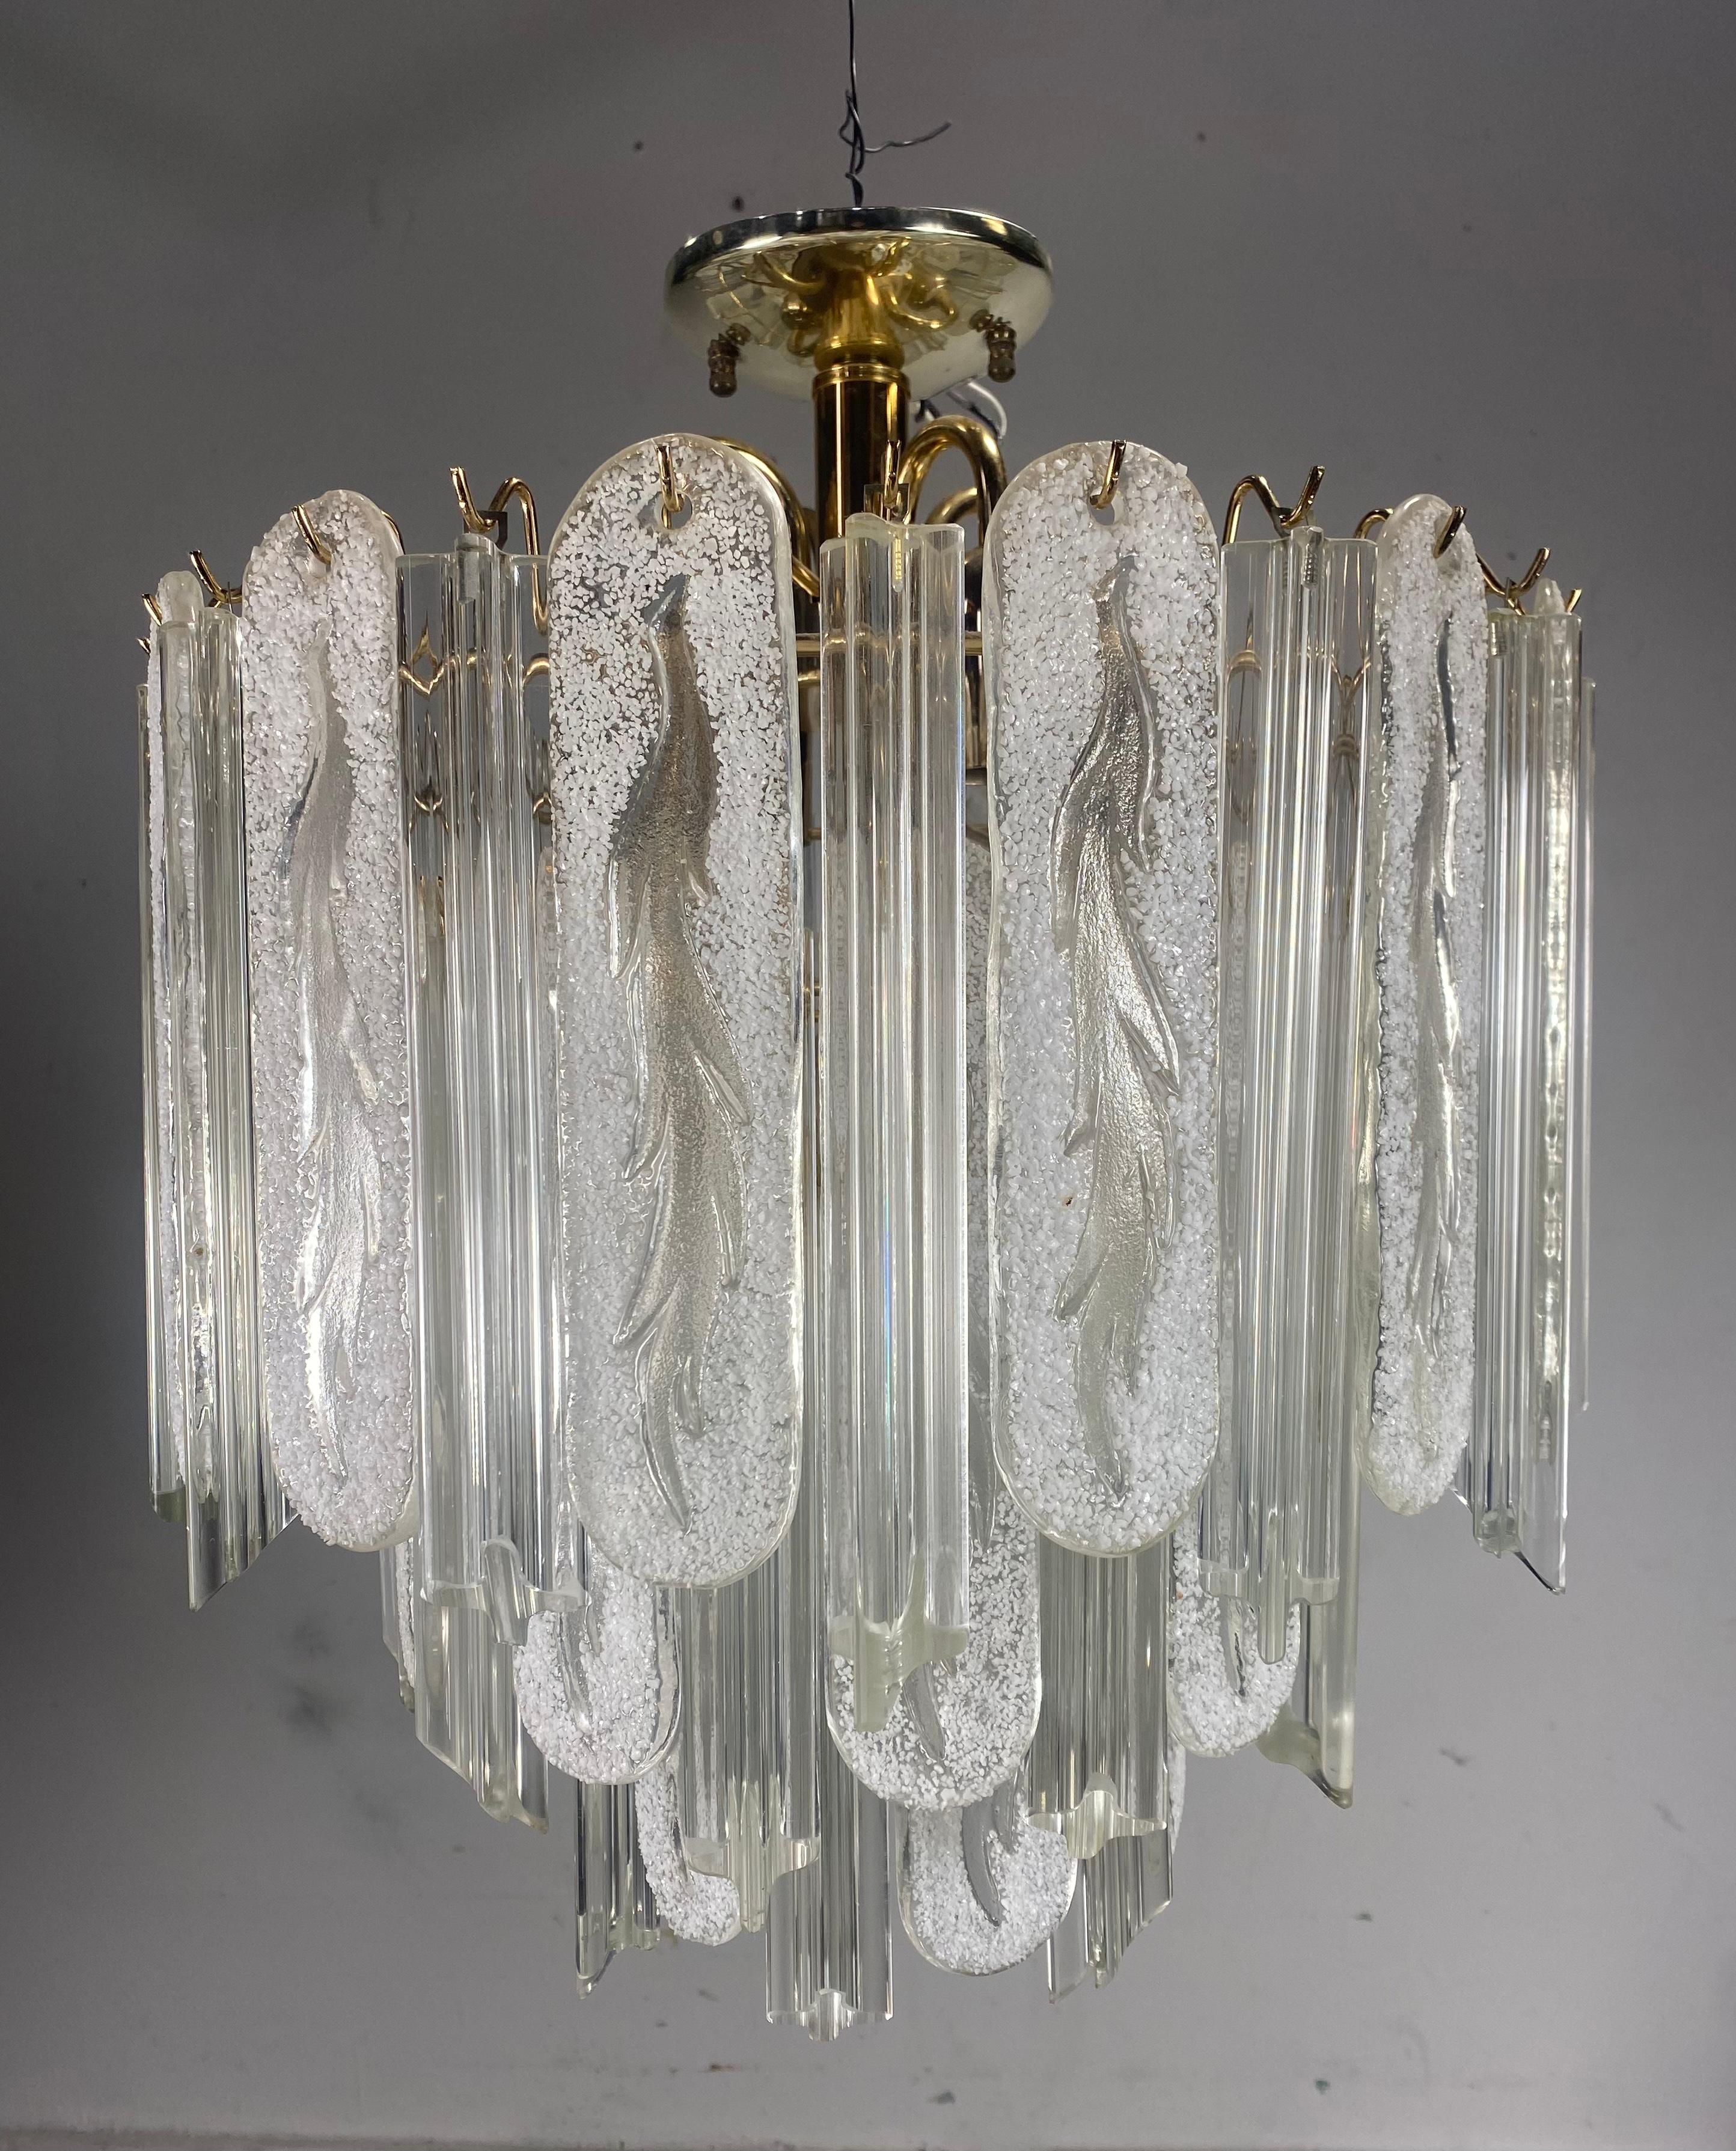 Hand-Crafted Stunning, Dramatic Murano “Triedi” Chandelier Attributed to Venini For Sale